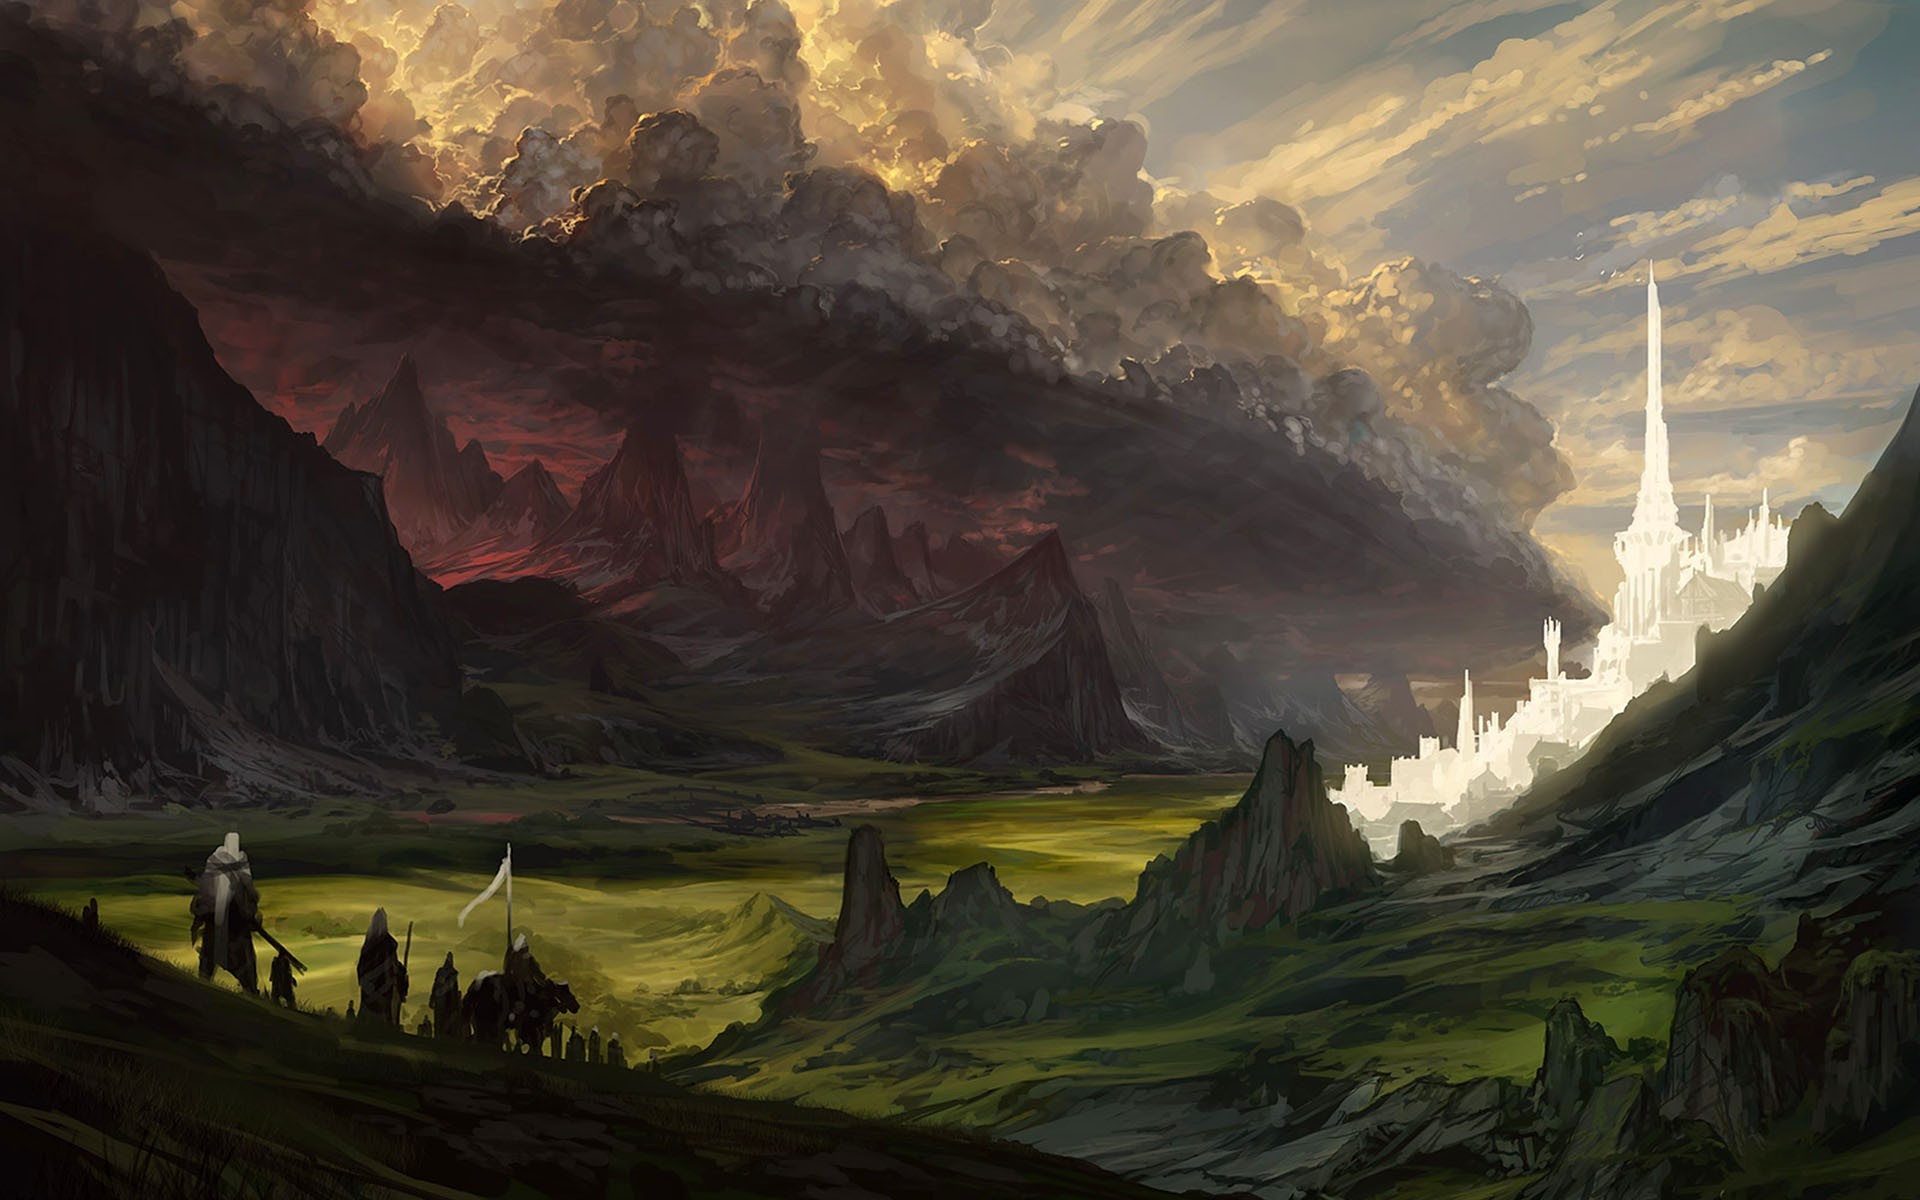 Minas Tirith  Middle earth art, Fantasy landscape, Lord of the